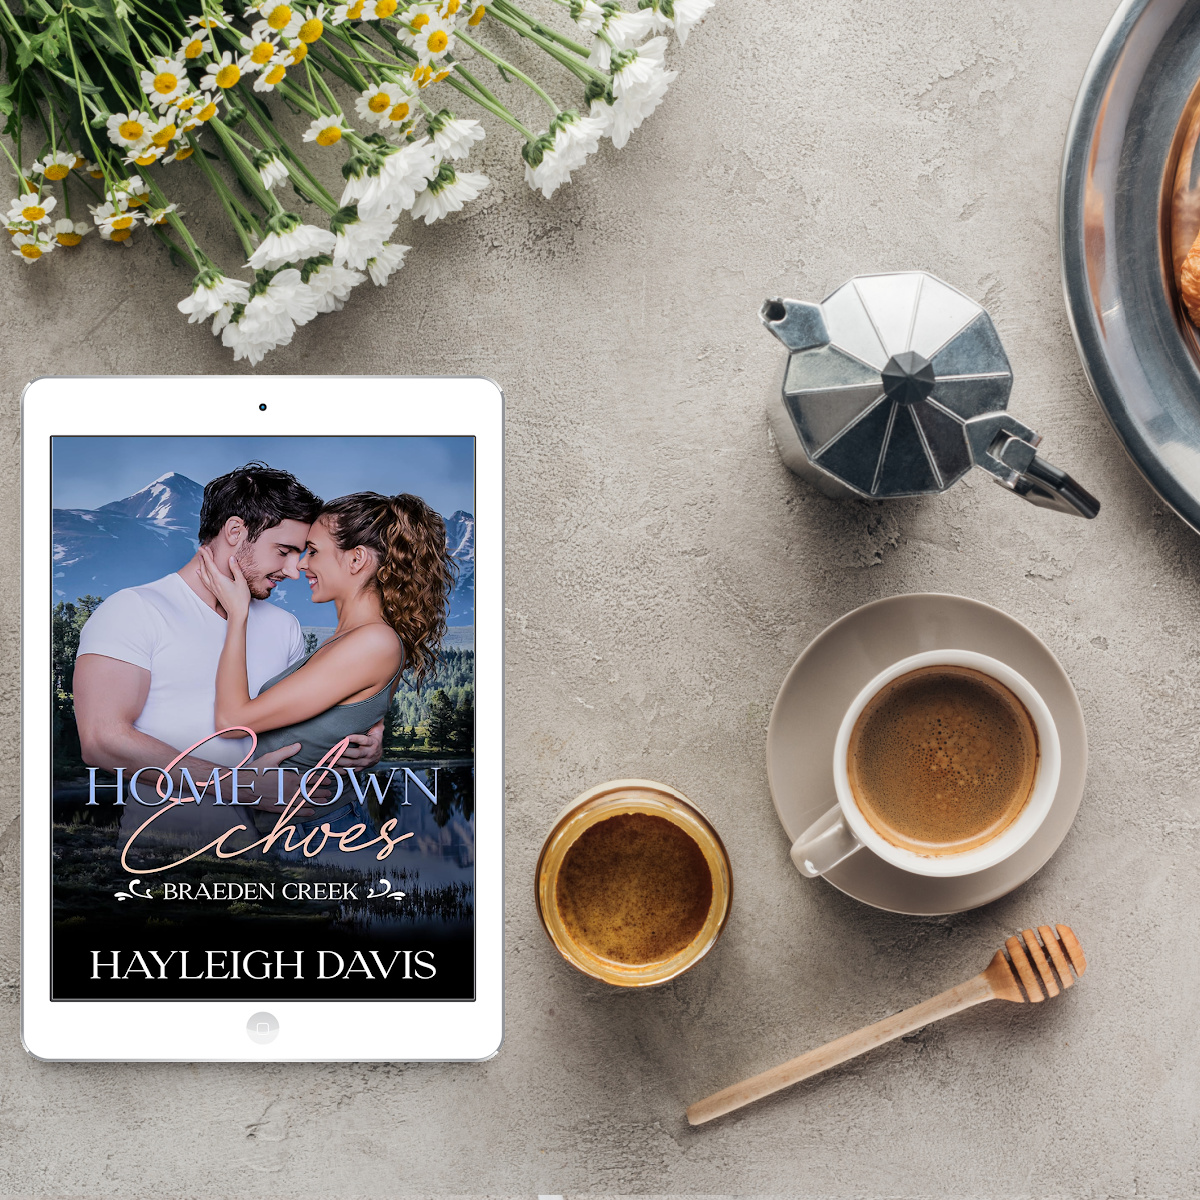 SMALL TOWN ROMANCE FANS: HEADS UP! Hometown Echoes is sweet, spicy, and suspenseful. Grab this new release by Hayleigh Davis today! Universal: geni.us/HometownEchoes #booklaunch #newbooks #hometownechoes #braedencreek #romancenovels #romancebooks @ElleWoodsPR #1852MEDIA